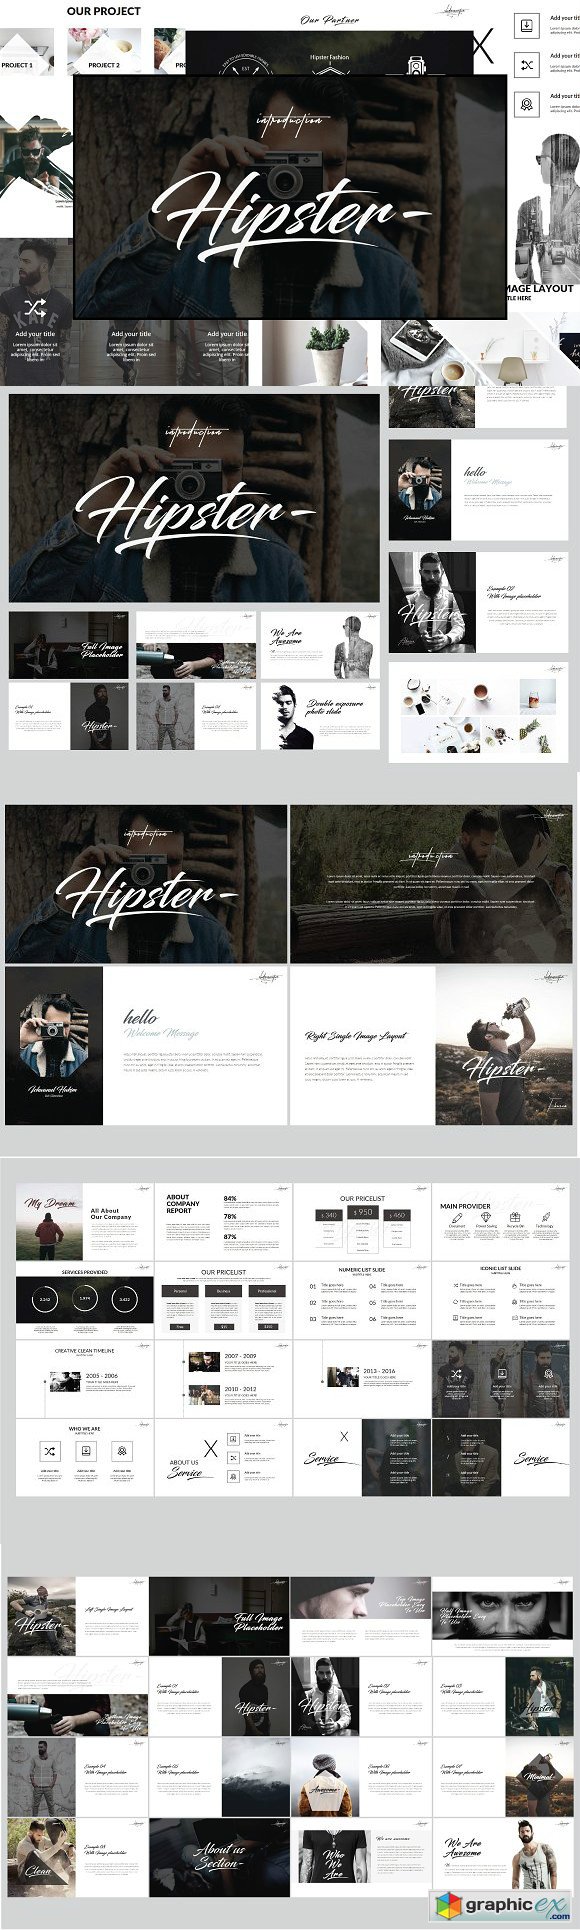 Hipster v2 Powerpoint Template